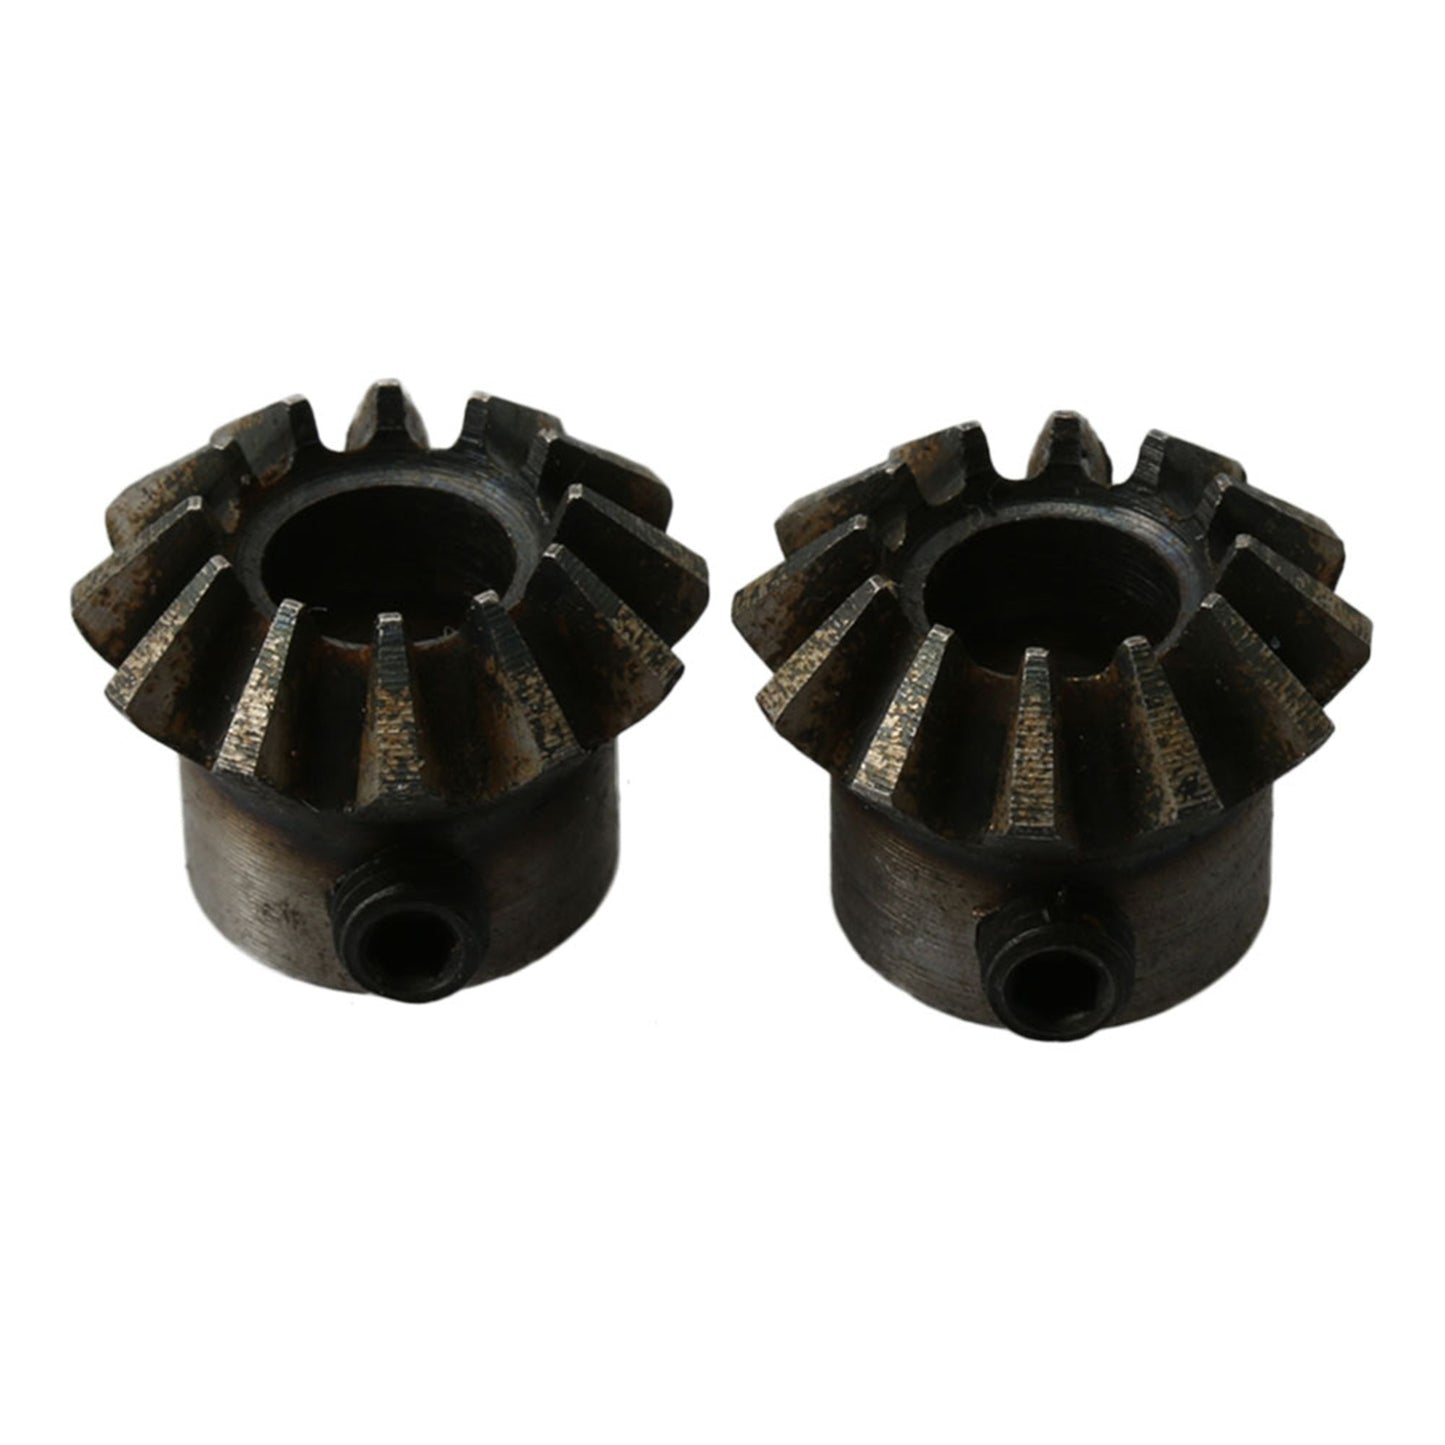 BQLZR 45# Steel 1.5 Modules 12 Teeth 8mm Hole Diameter 20mm OD Tapered Bevel Gear Wheel for Mechanical Accessory Pack of 2